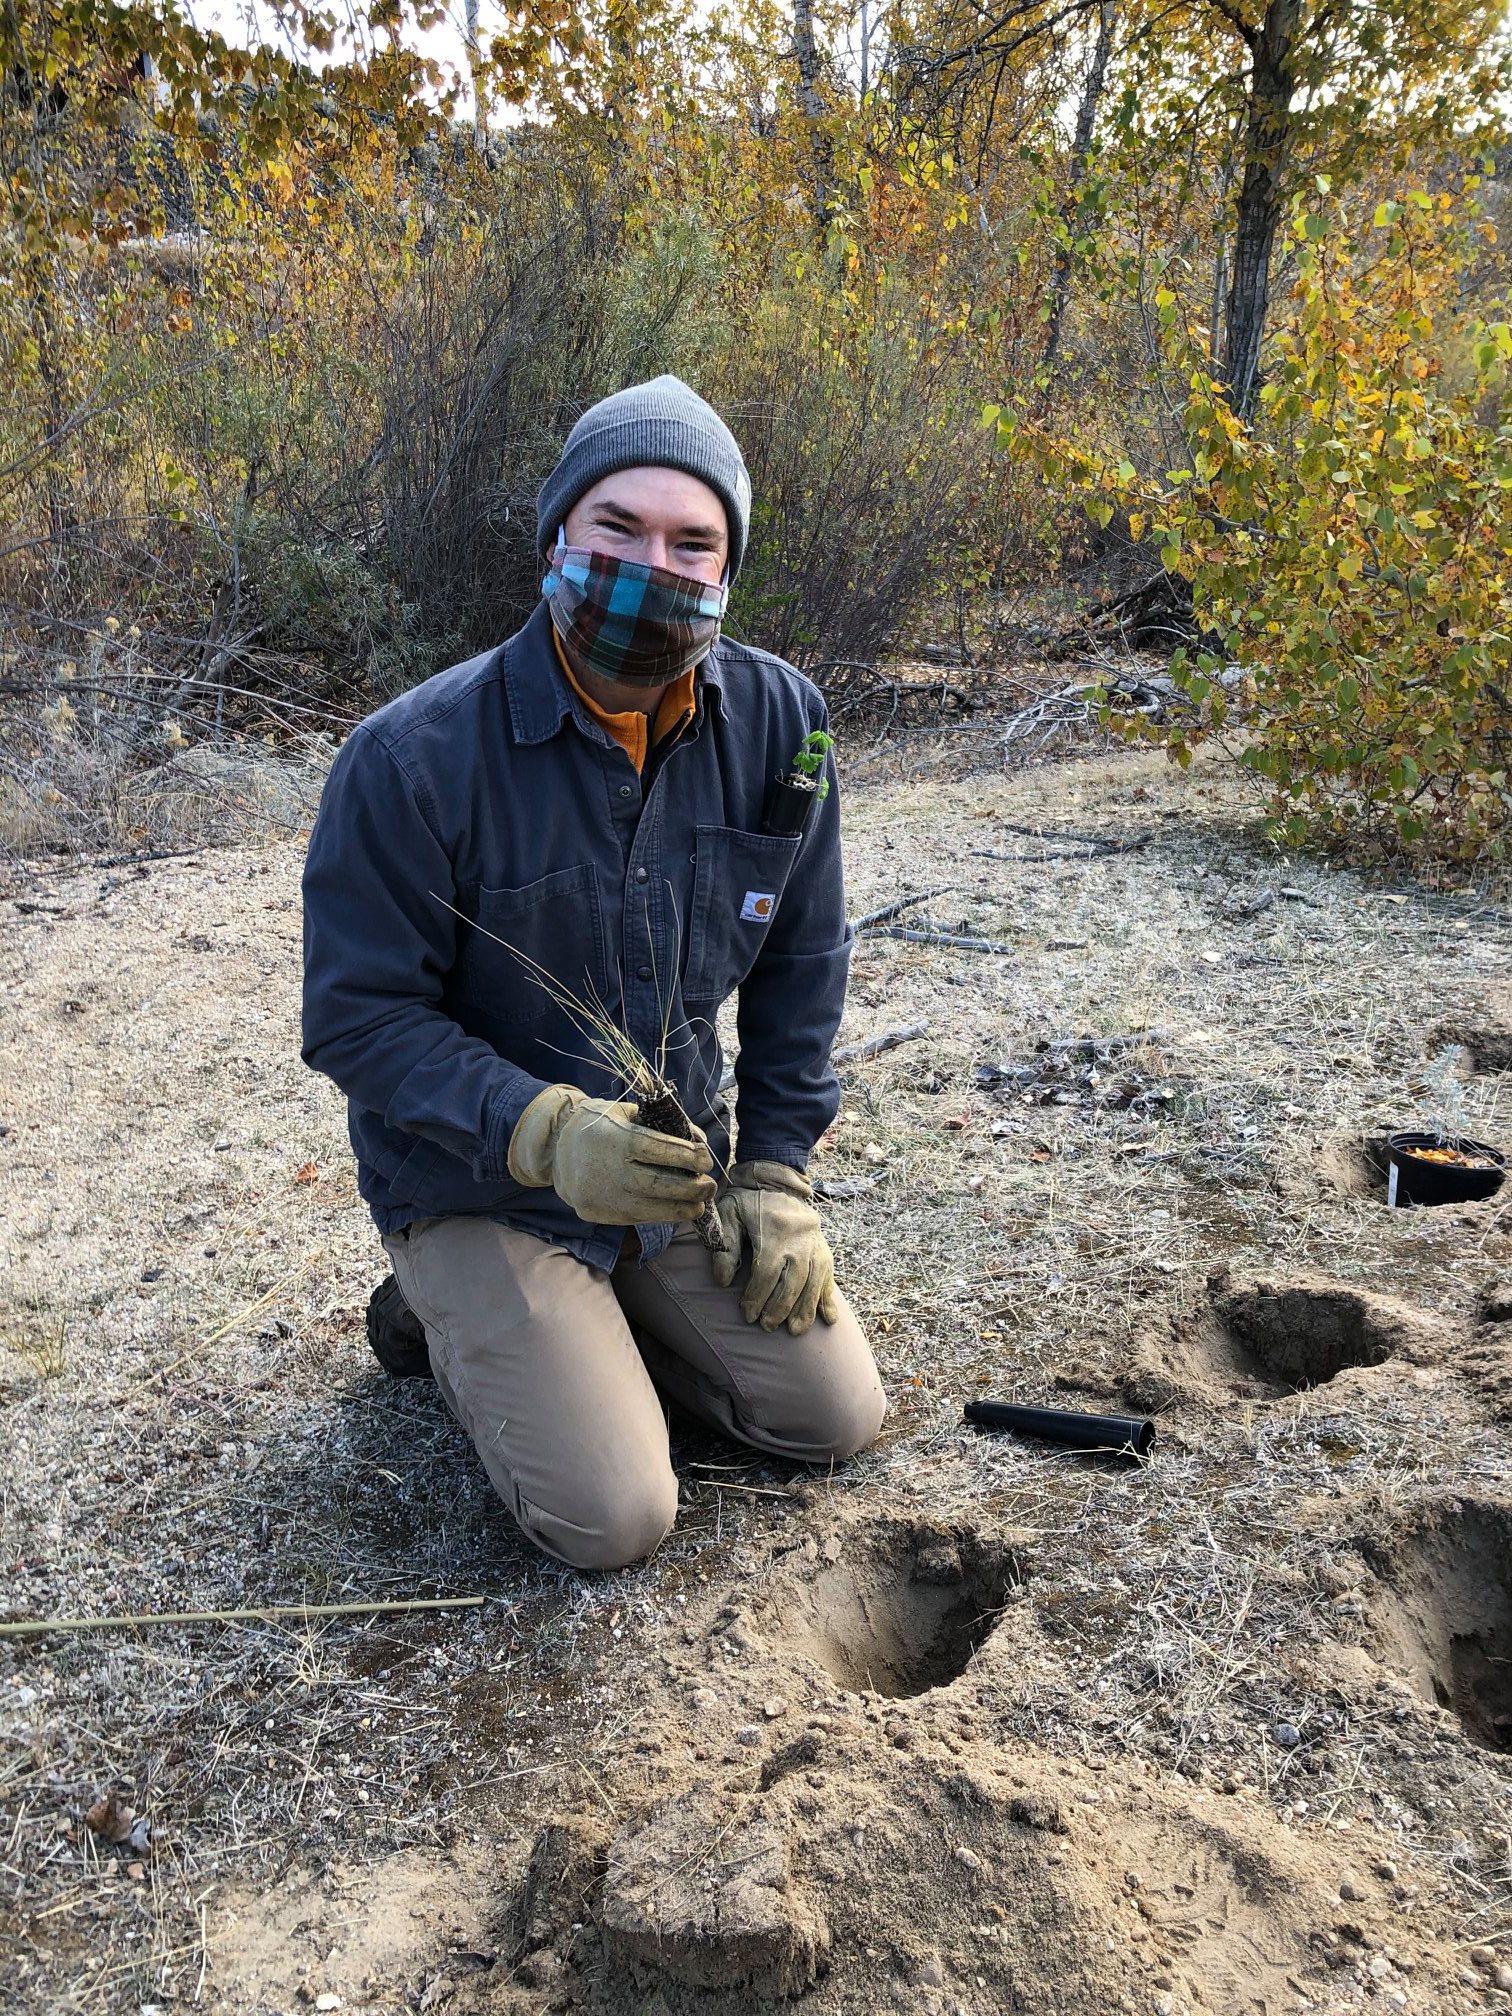 a volunteer wearing a cloth face mask and smiling at the camera kneels on the ground. He's holding a seedling plant near a hole in the dirt, ready to plant it